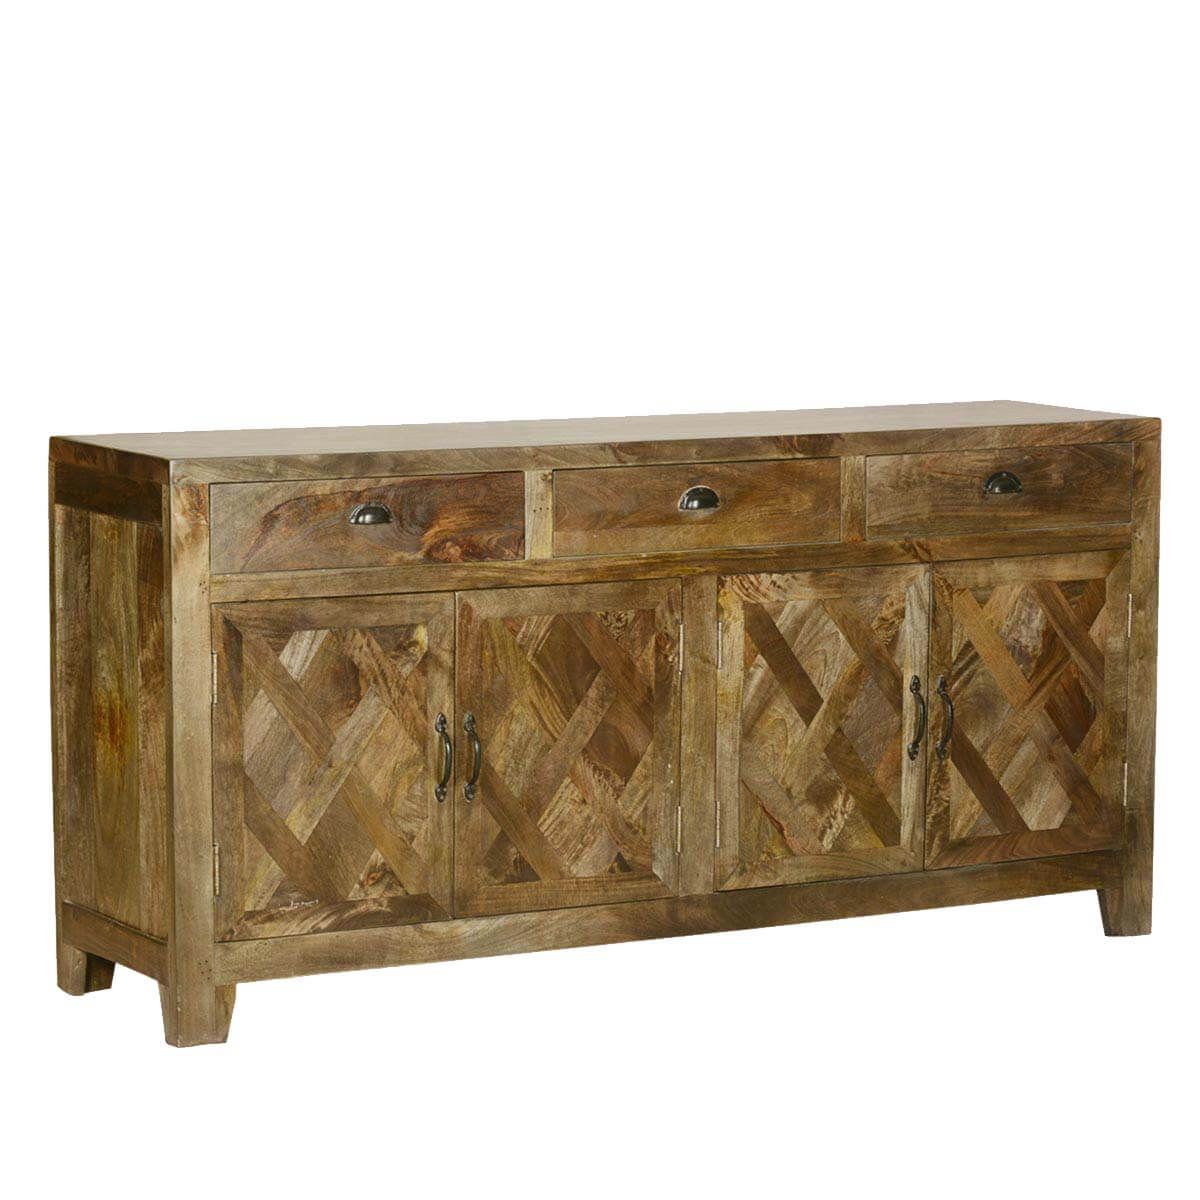 Parquet Farmhouse Mango Wood Rustic Sideboard Buffet Cabinet Throughout Macdonald 36" Wide Mango Wood Buffet Tables (View 5 of 15)